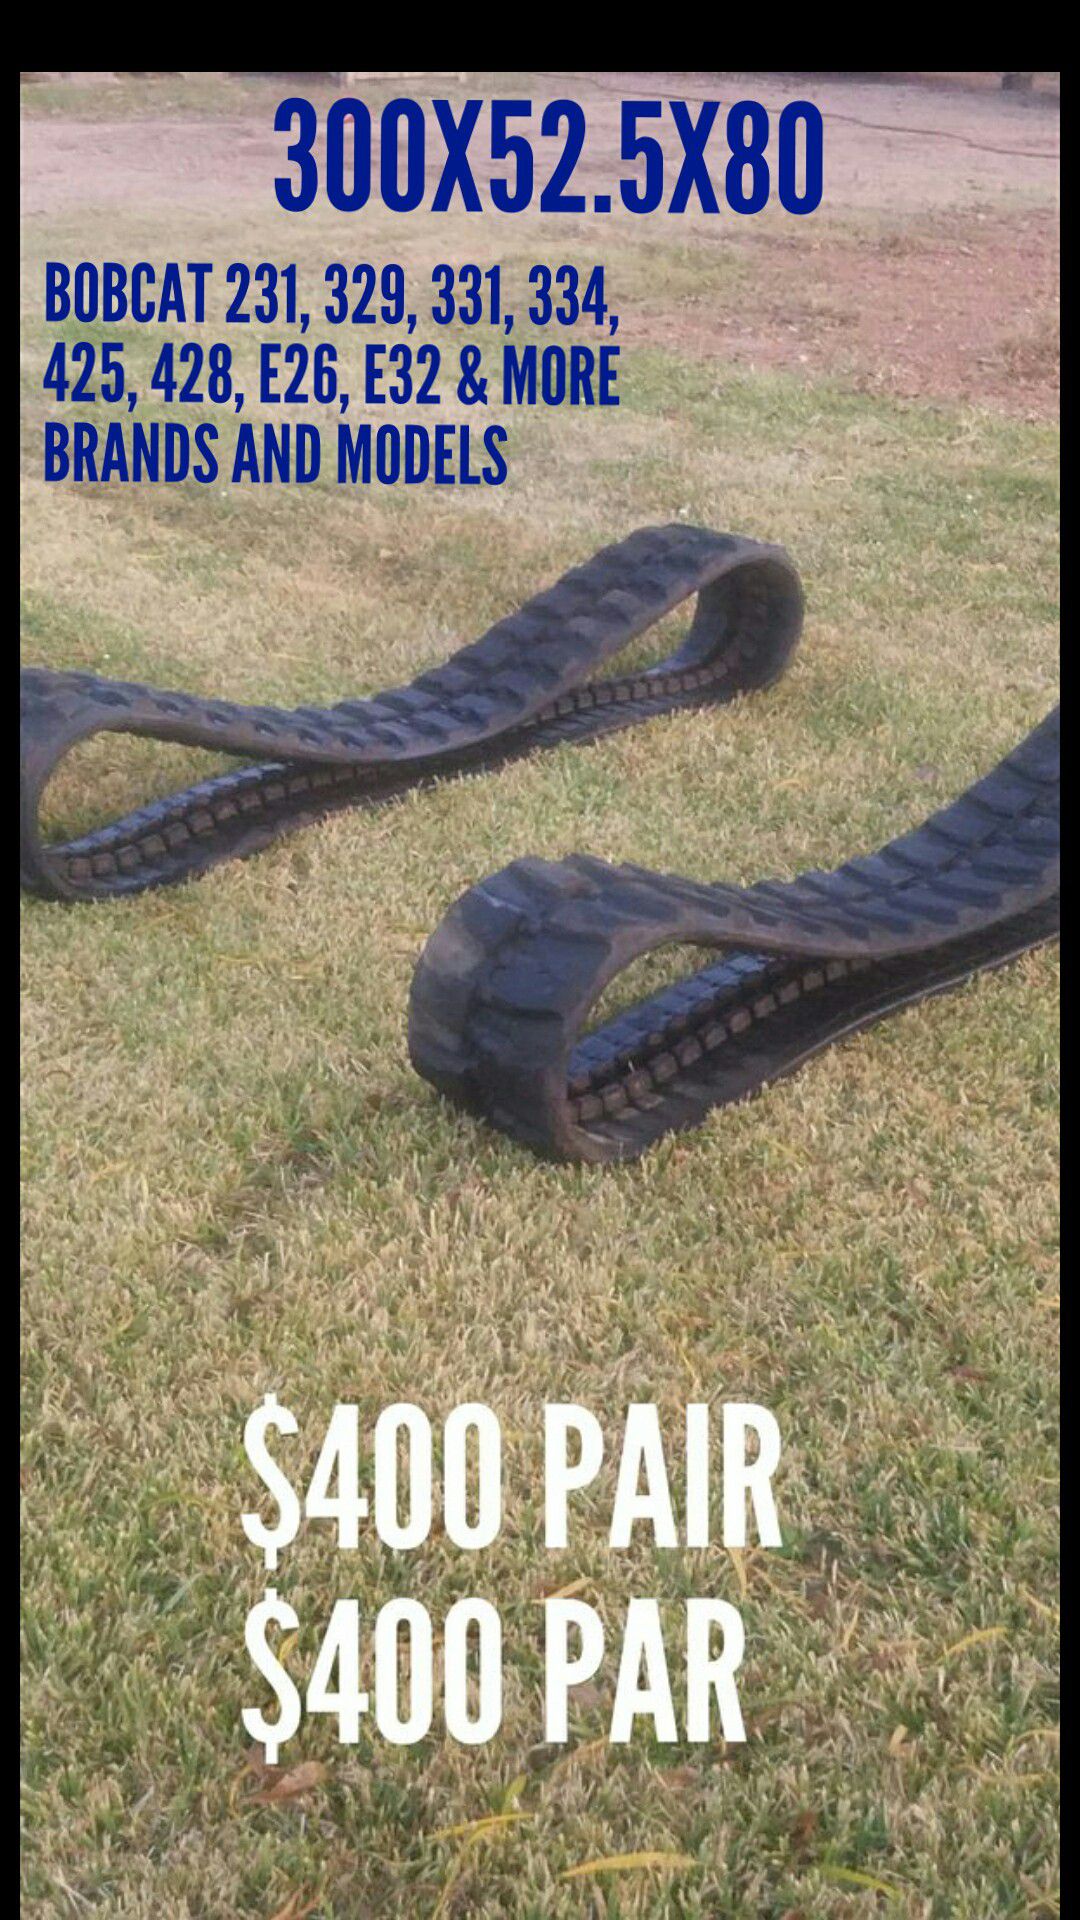 300X52.5X80 OEM PART No.7165834, RUBBER TRACKS FOR BOBCAT 231, 329, 331, 334, 425, 428, E26, E32 AND MANY MORE MODELS AND BRANDS IN GREAT CONDITIONS